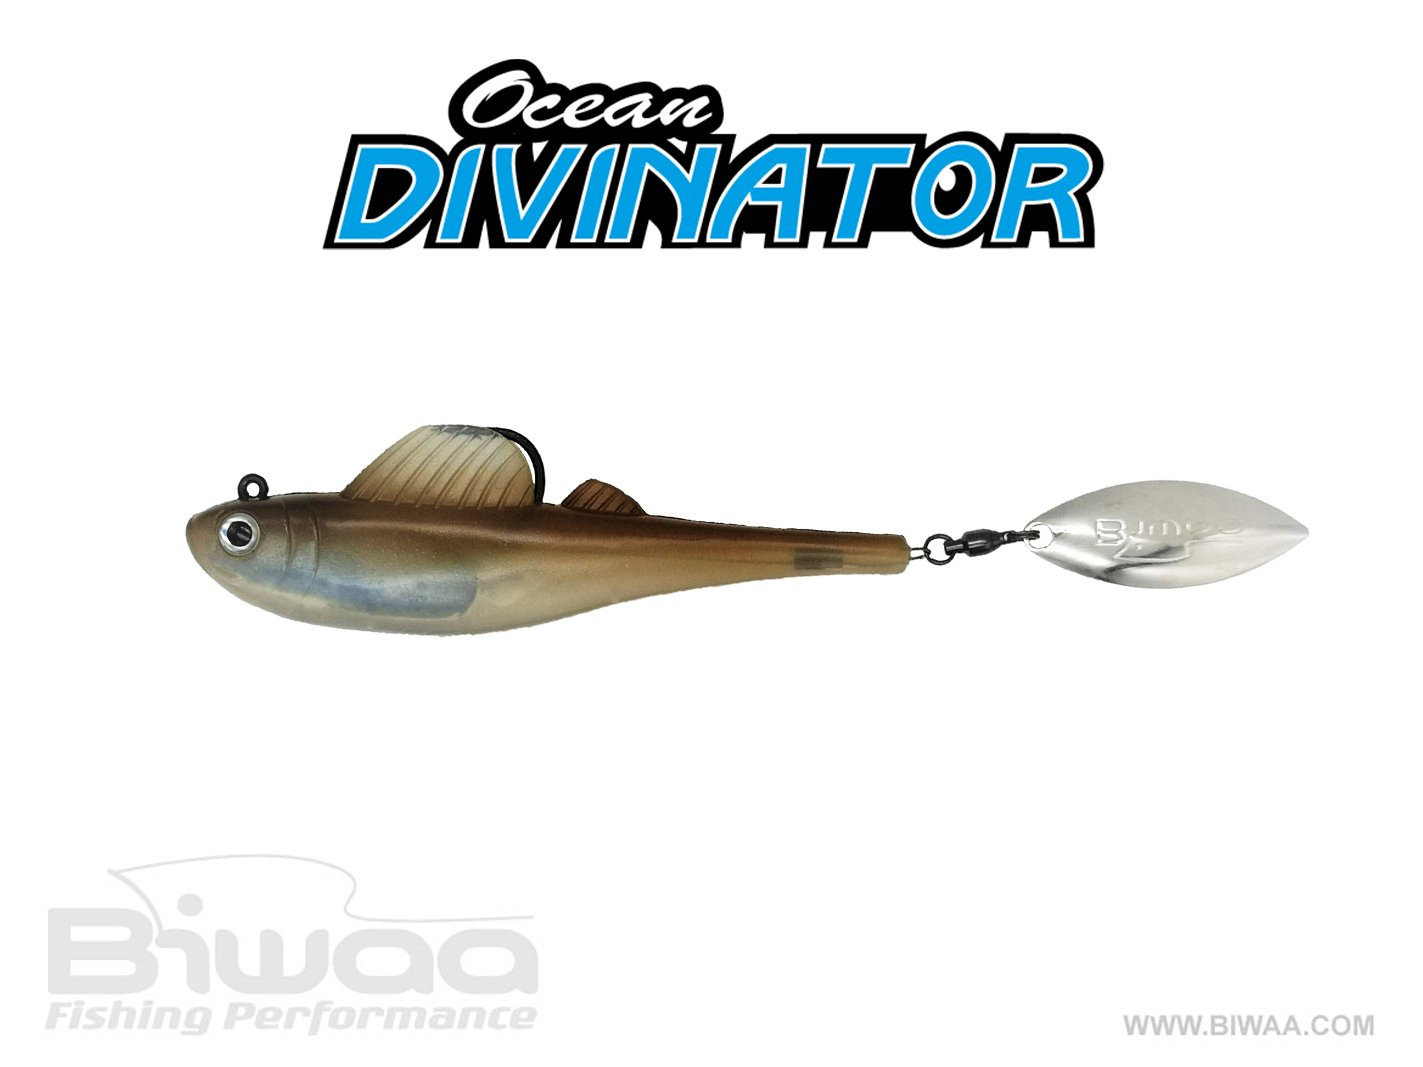 The OCEAN DIVINATOR is a whole new concept of soft lure 